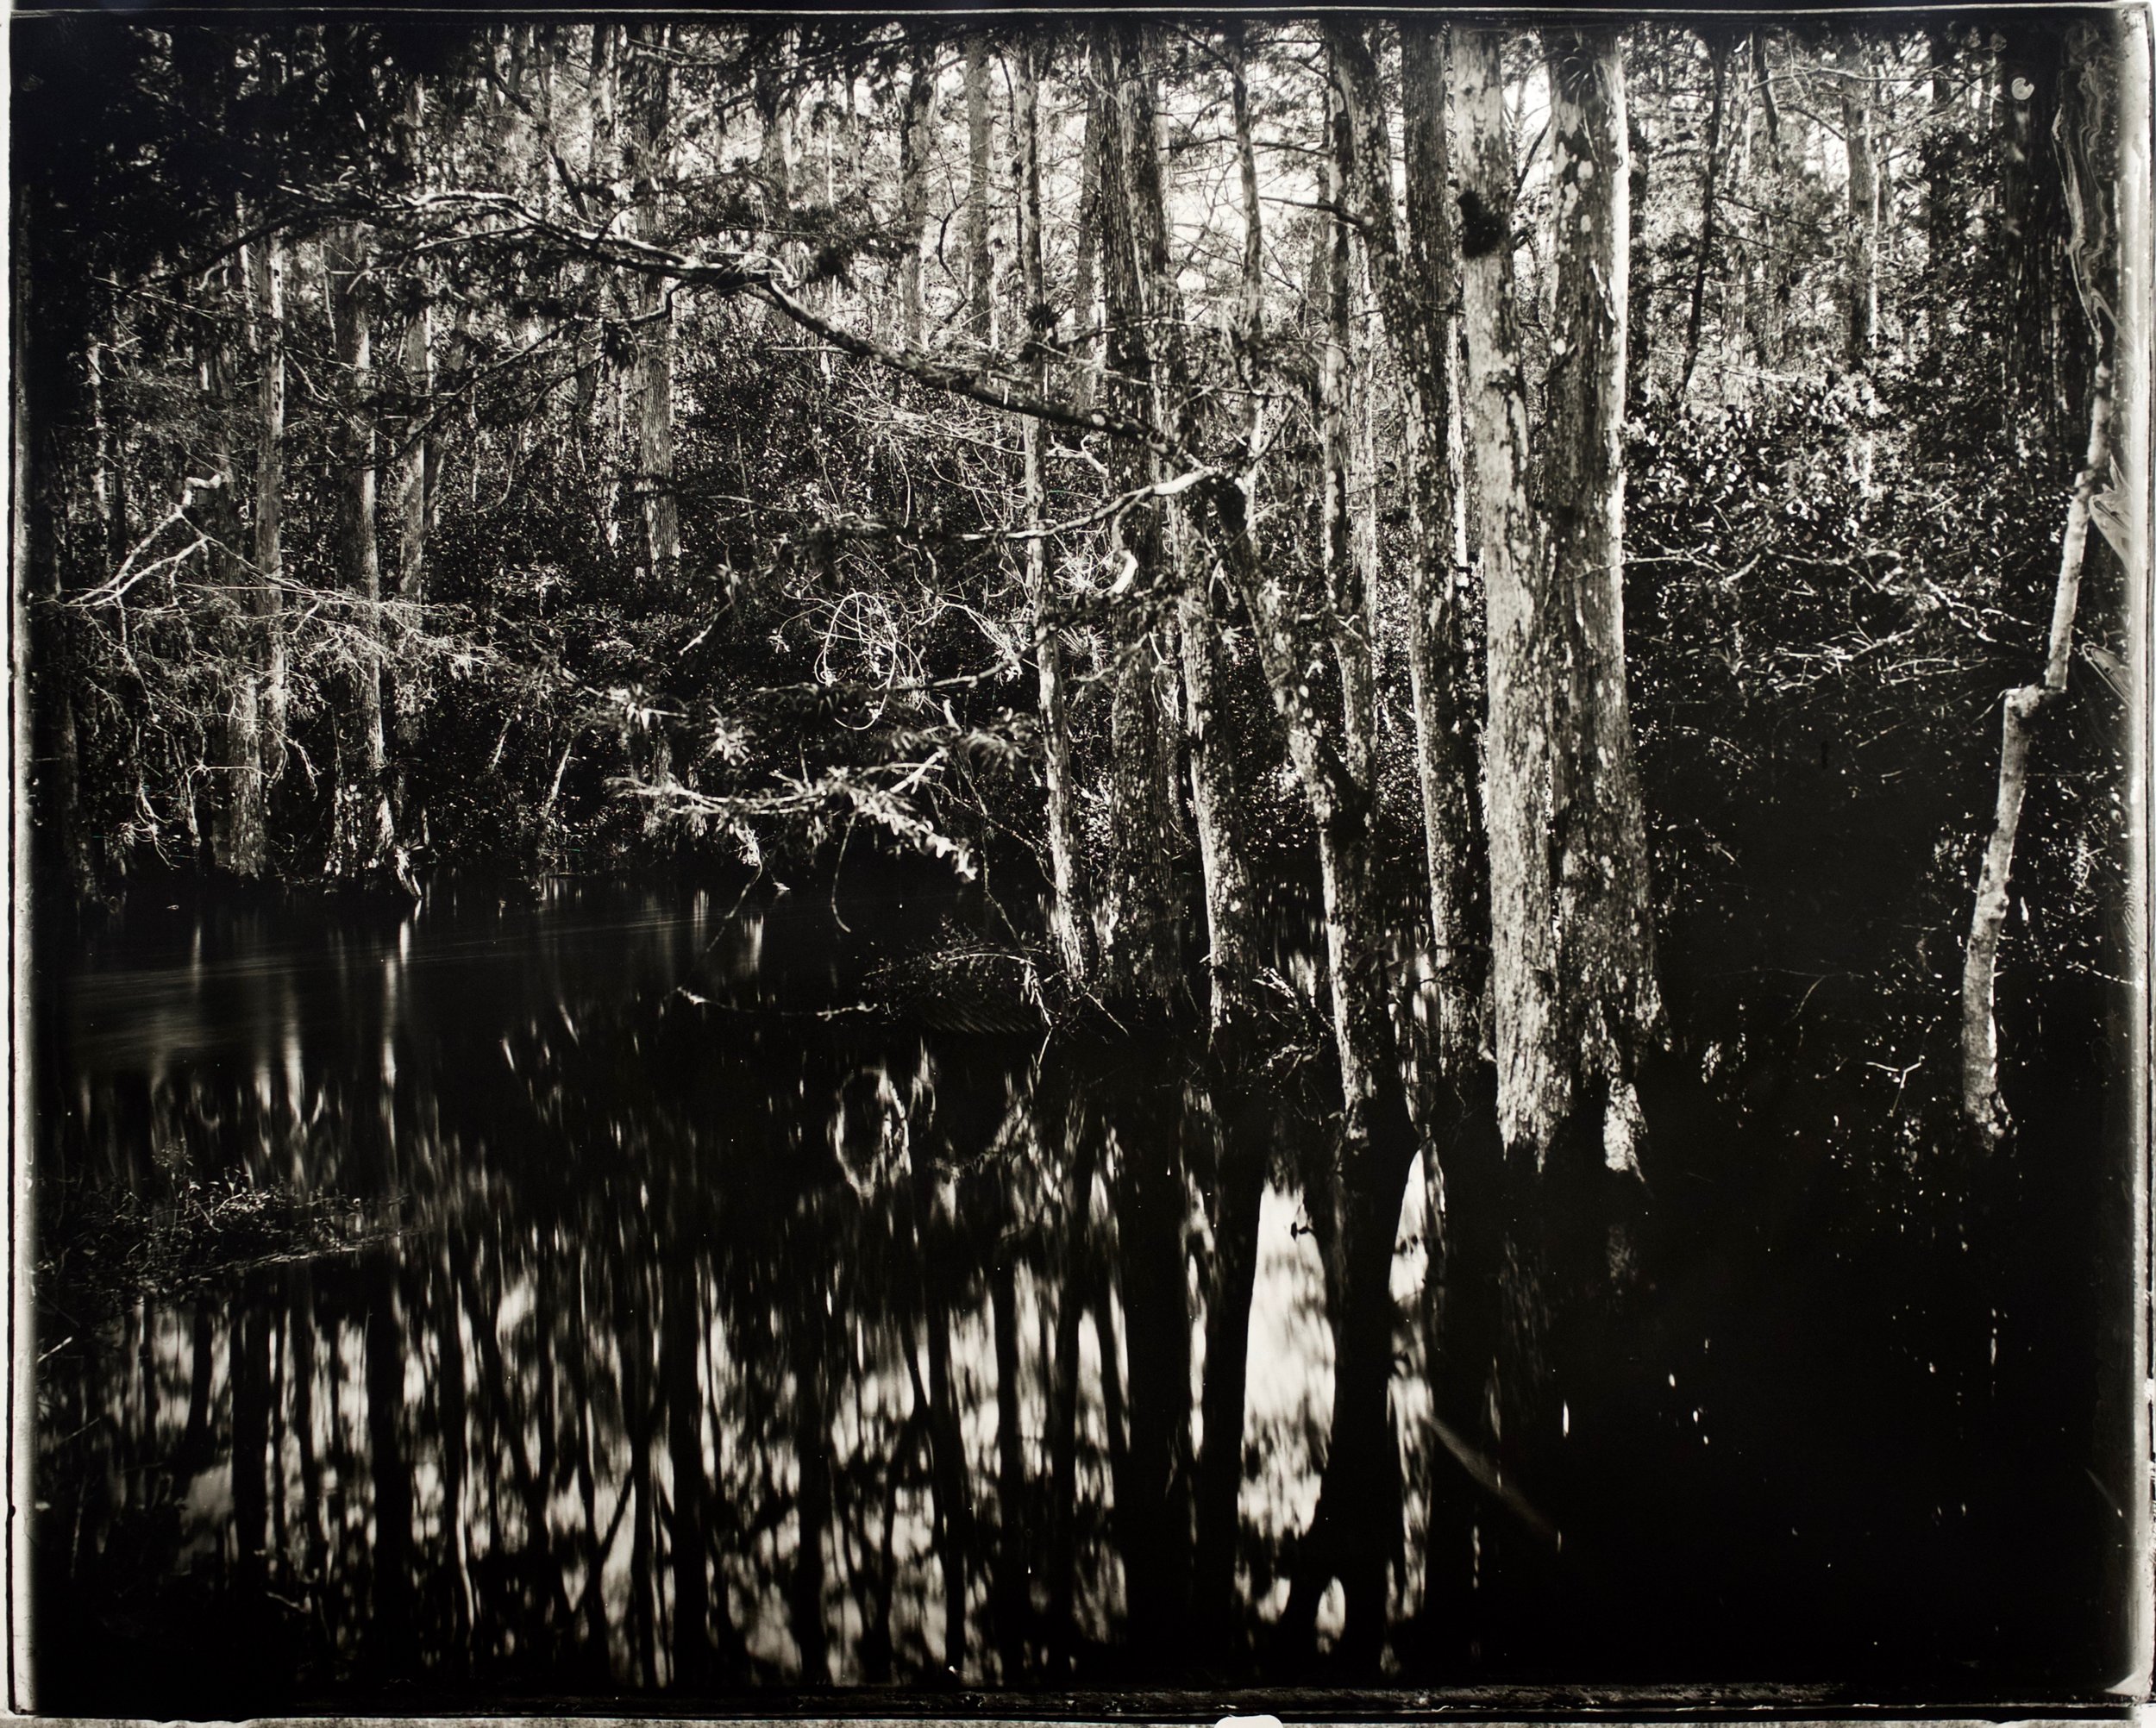 Reverse Focus Everglades 37 in. x 30 in., collodian negative hand printed on Fomatone paper, 2018. 2018-21.jpg